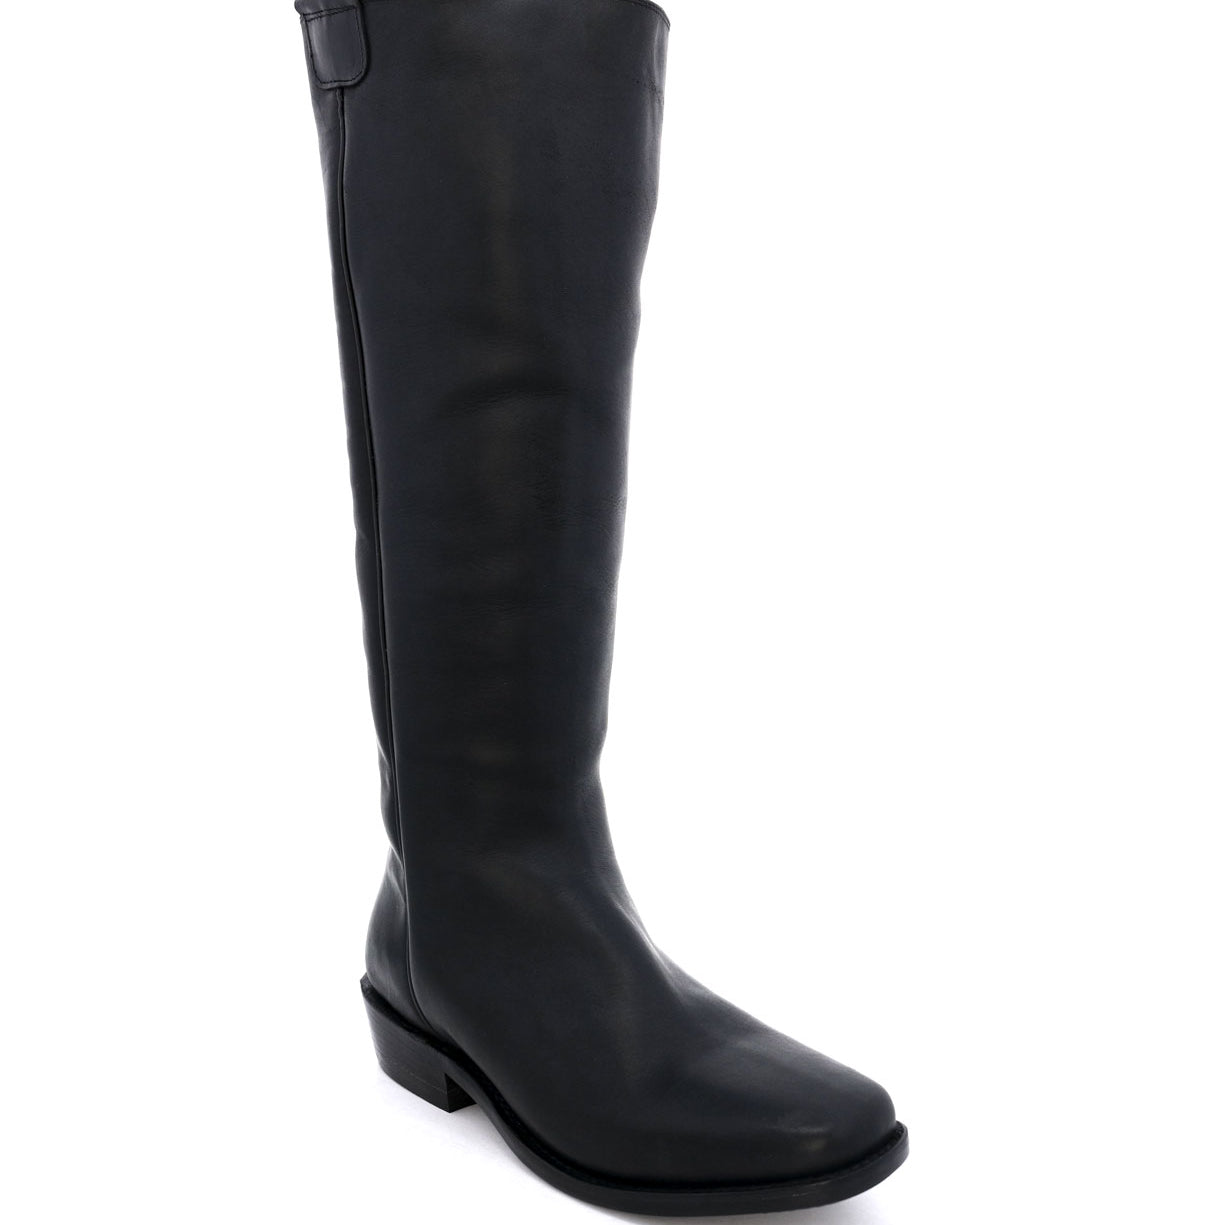 An Oak Tree Farms Pale Rider men's tall black leather riding boot on a white background.